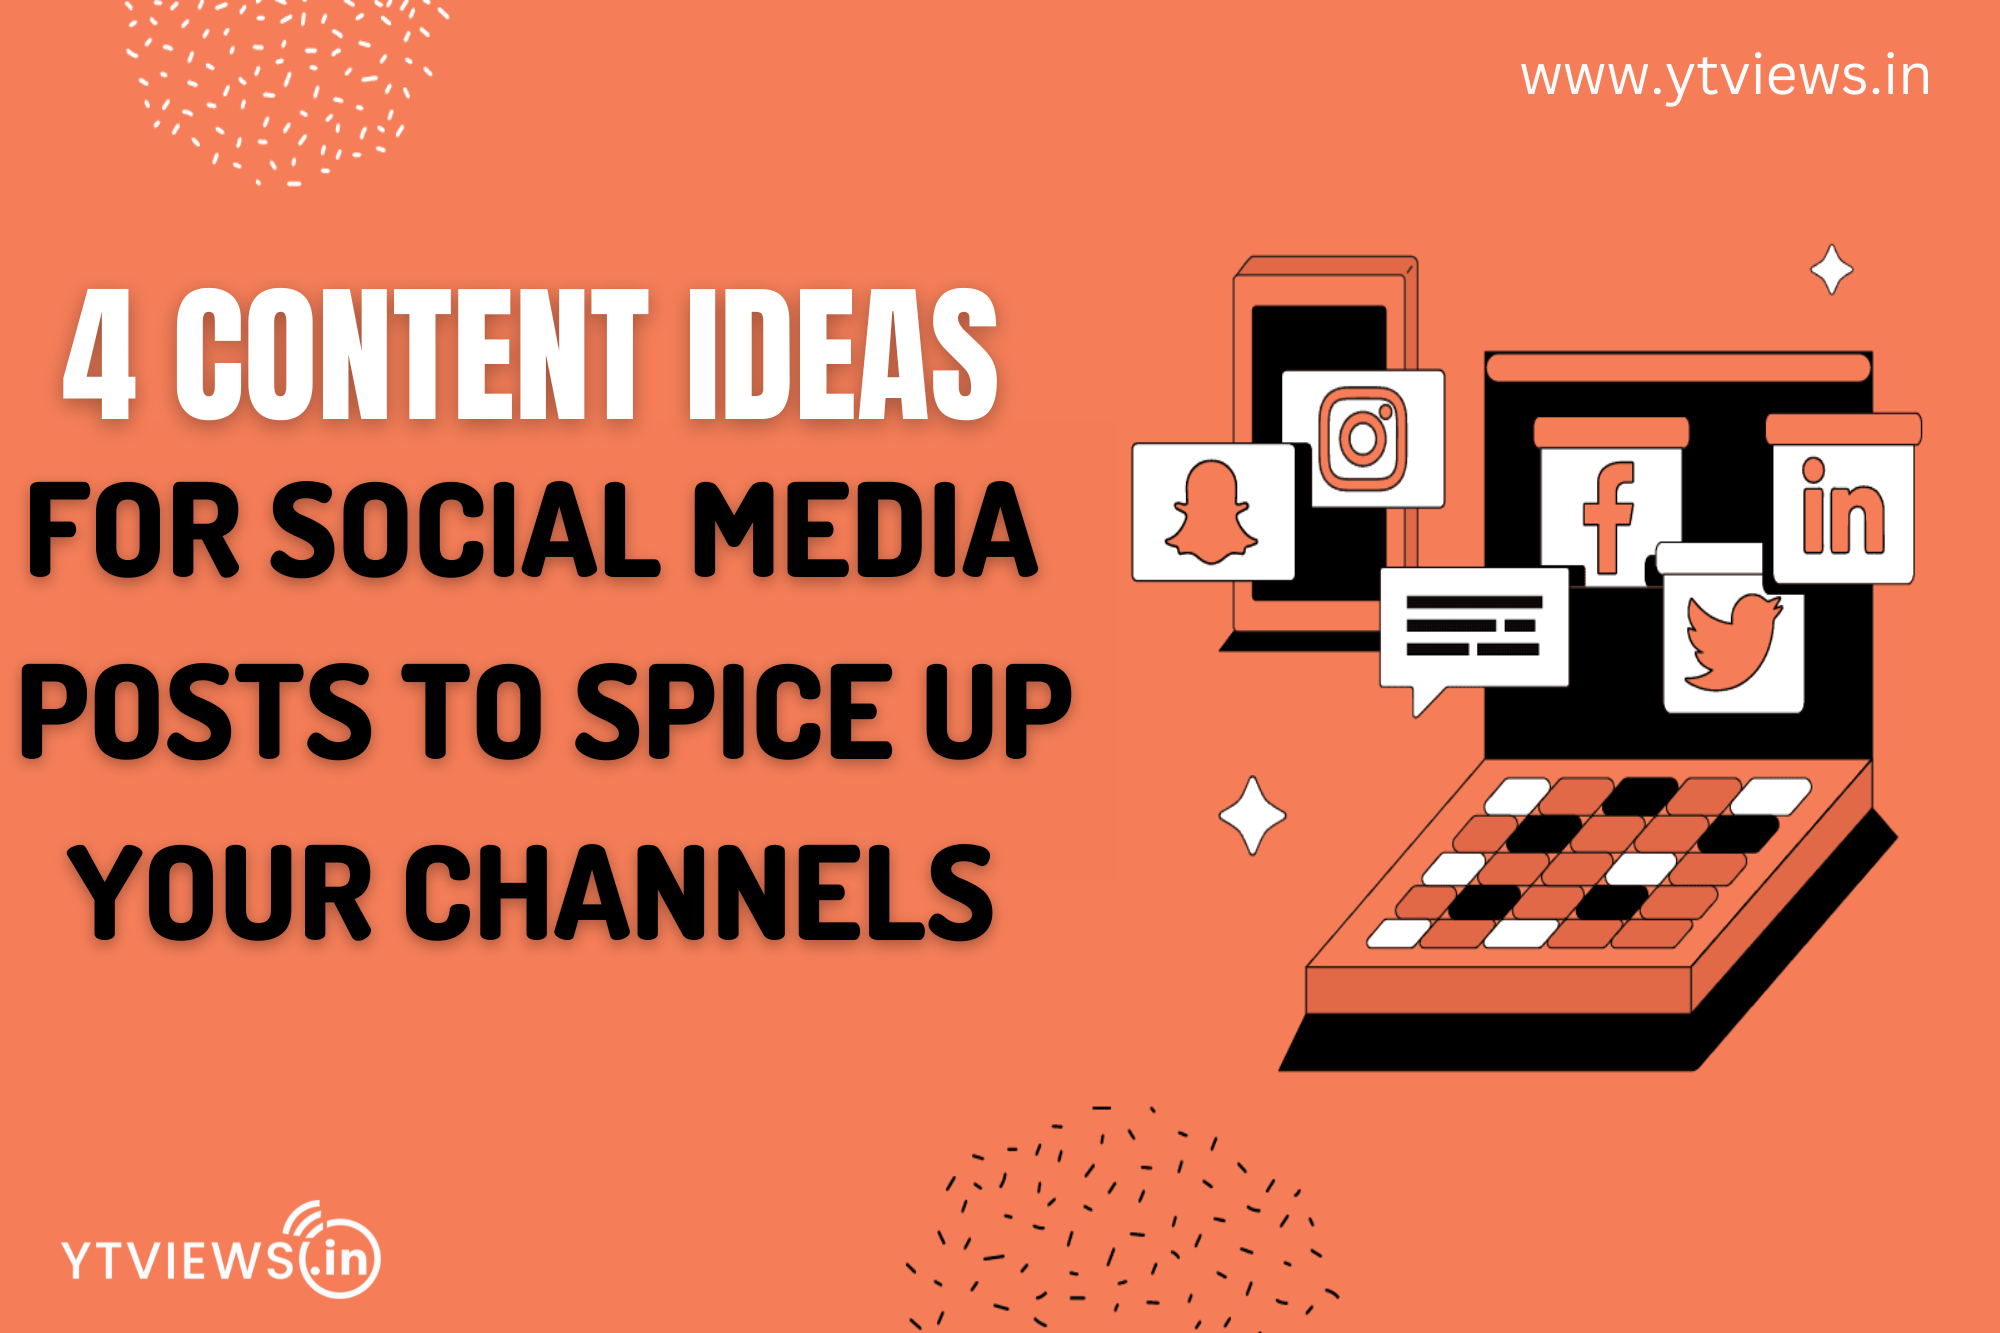 4 content ideas for social media posts to spice up your channels